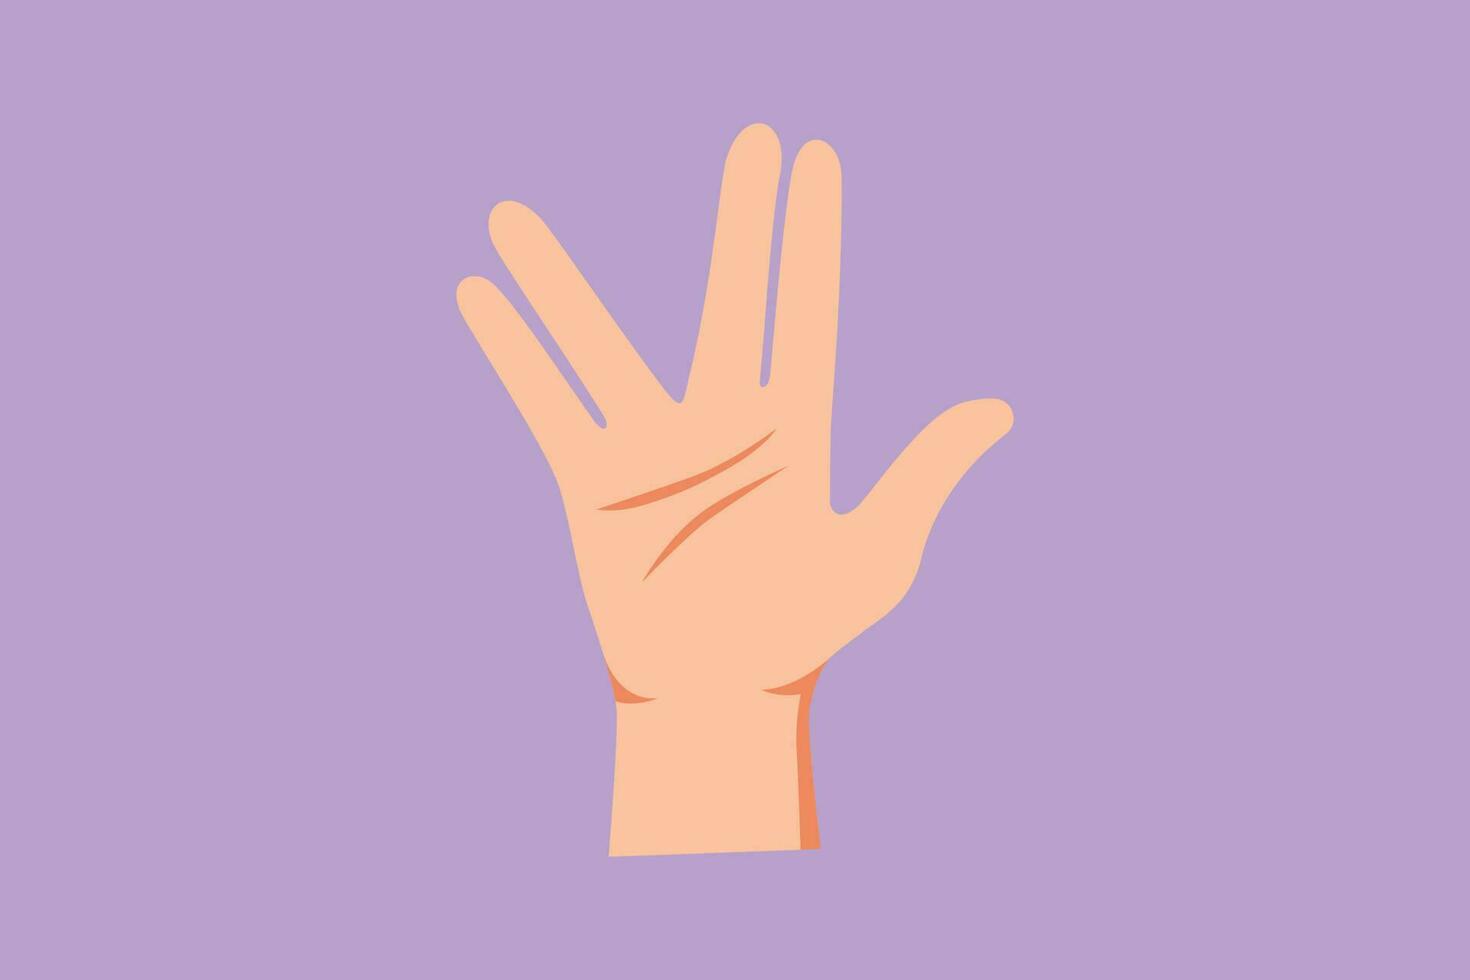 Graphic flat design drawing raised hand with the palm forward and the thumb extended, while the fingers are parted between middle and ring finger on blue background. Cartoon style vector illustration